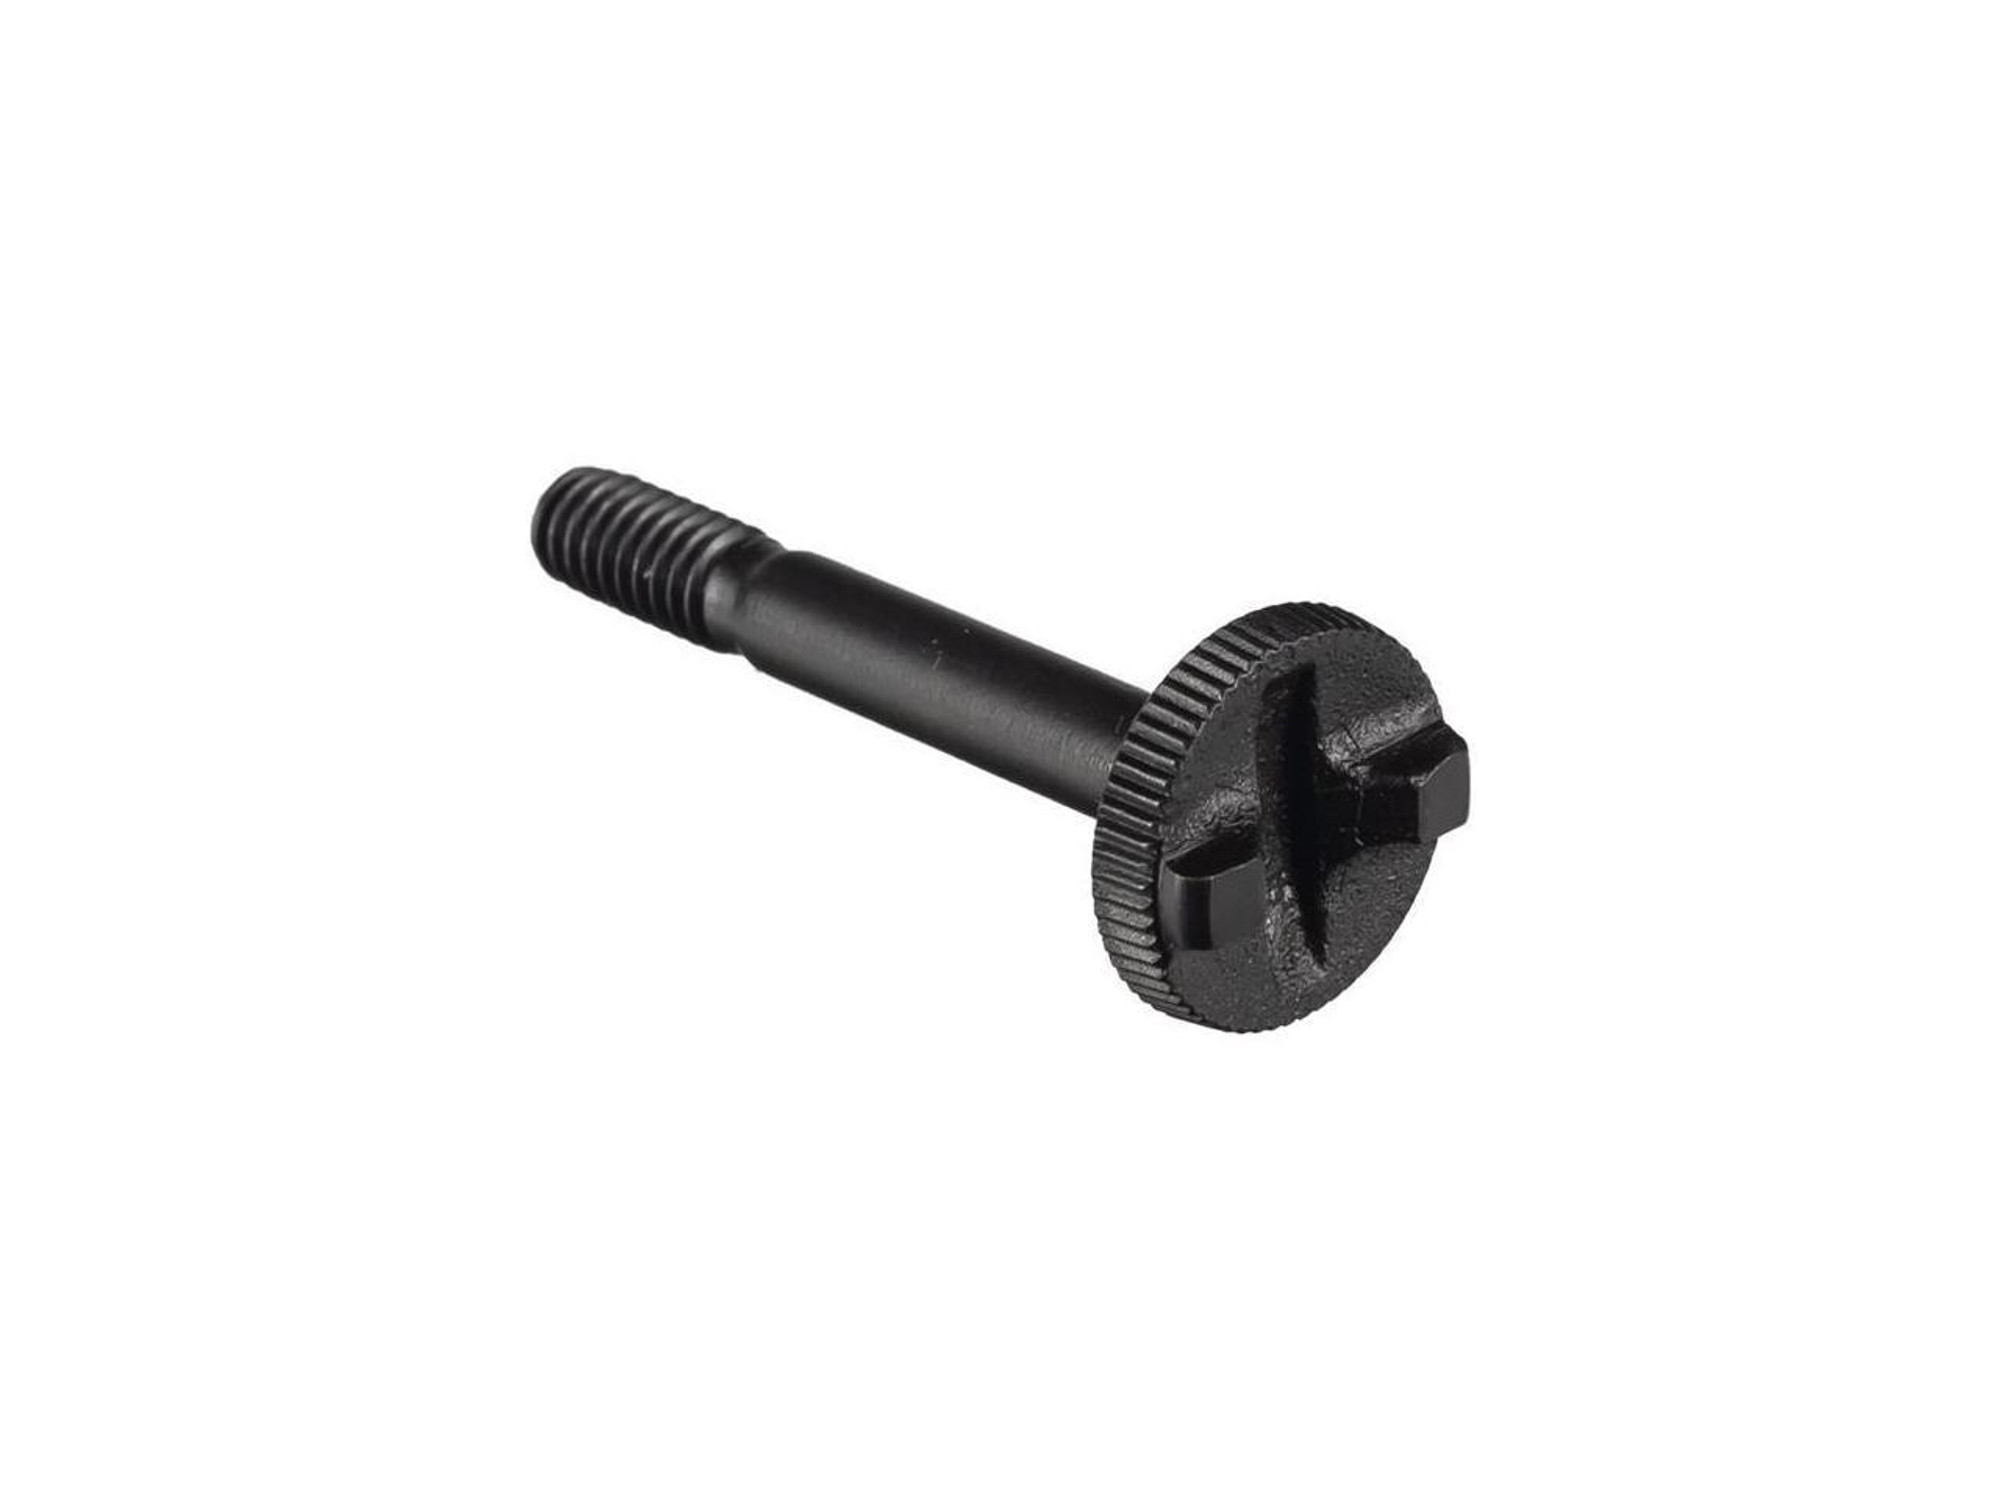 Clamp Screw (tlr-1 + 2)